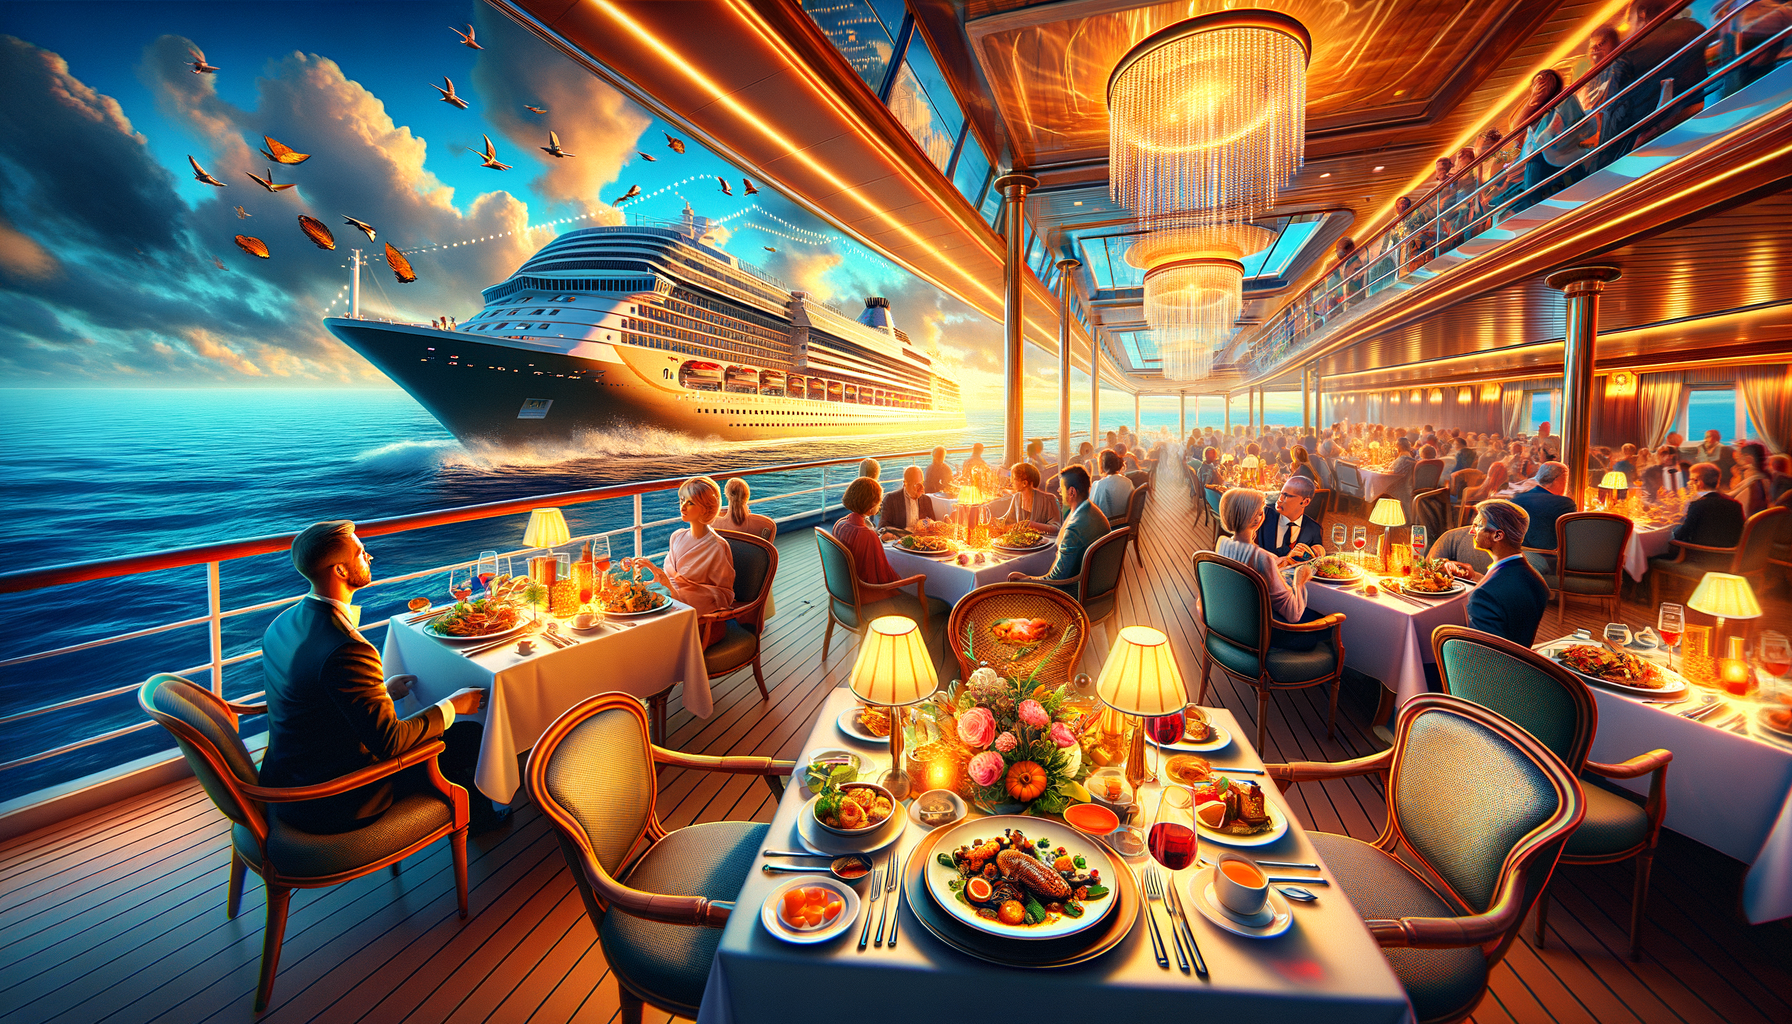 discover the finest dining experience at ms grace with a wide selection of restaurants and delicious food, as reviewed on cruise critic.